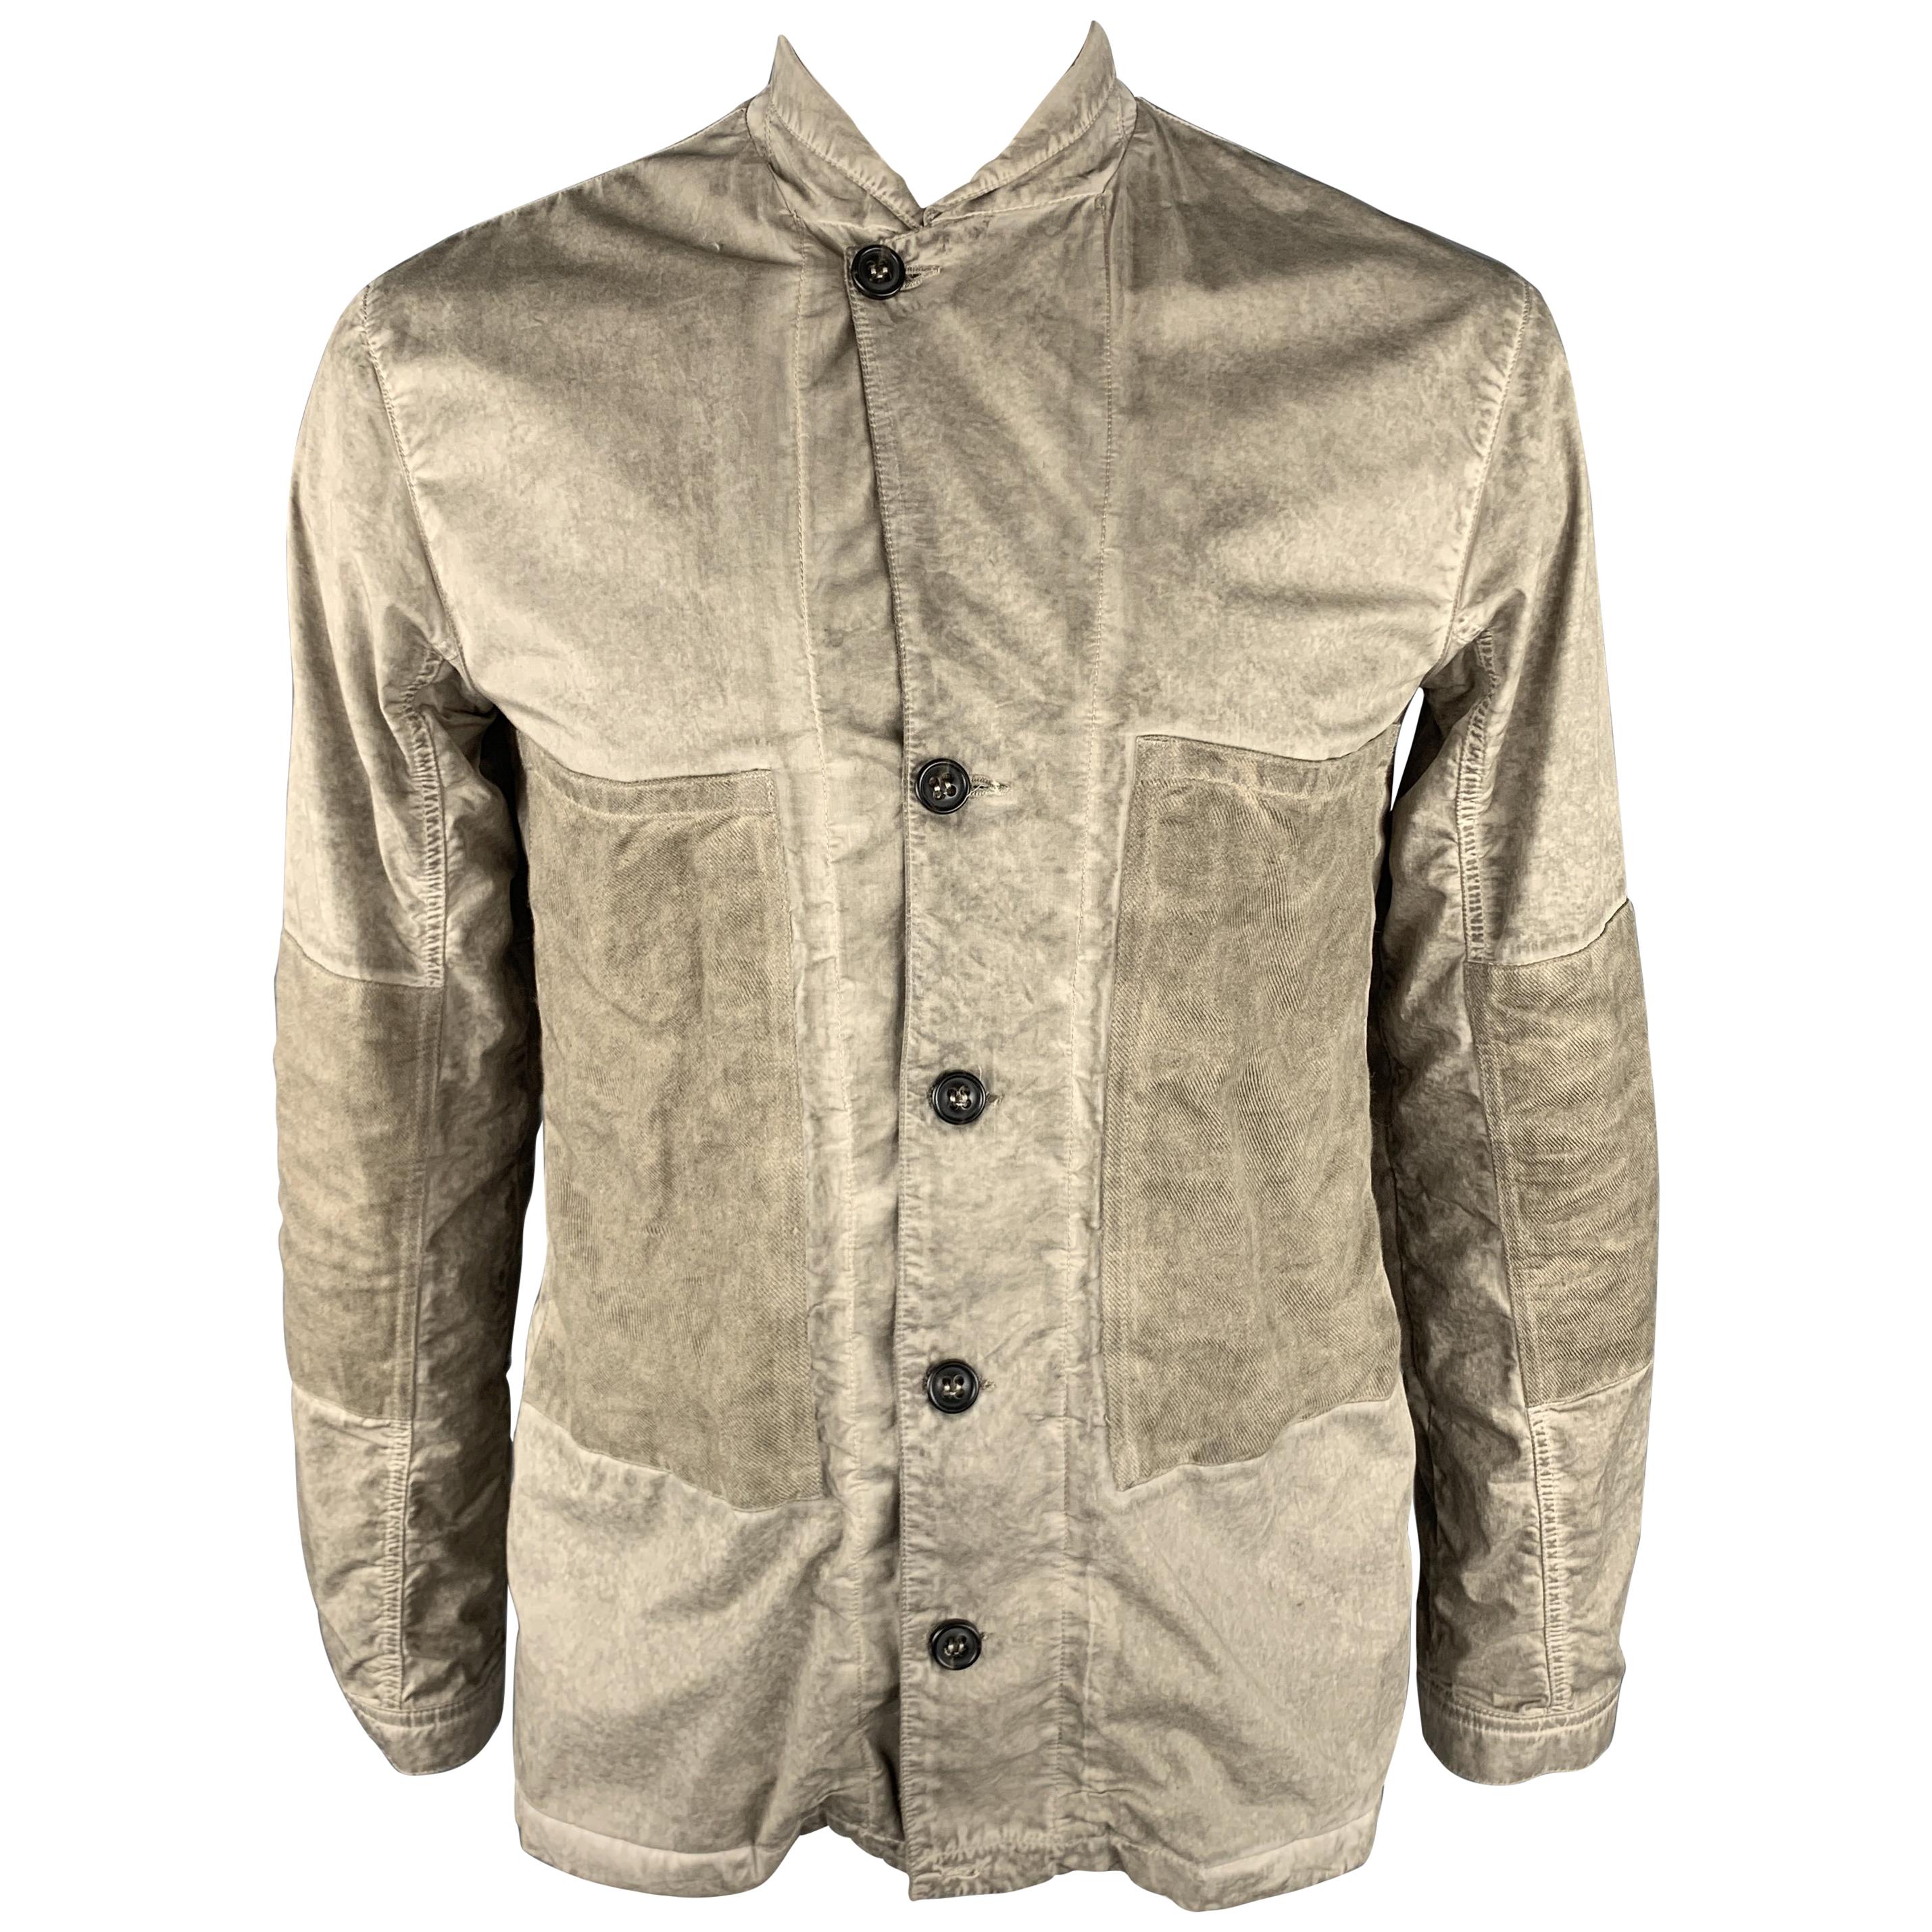 SILENT by DAMIR DOMA M Taupe Distressed Cotton Blend Buttoned Jacket